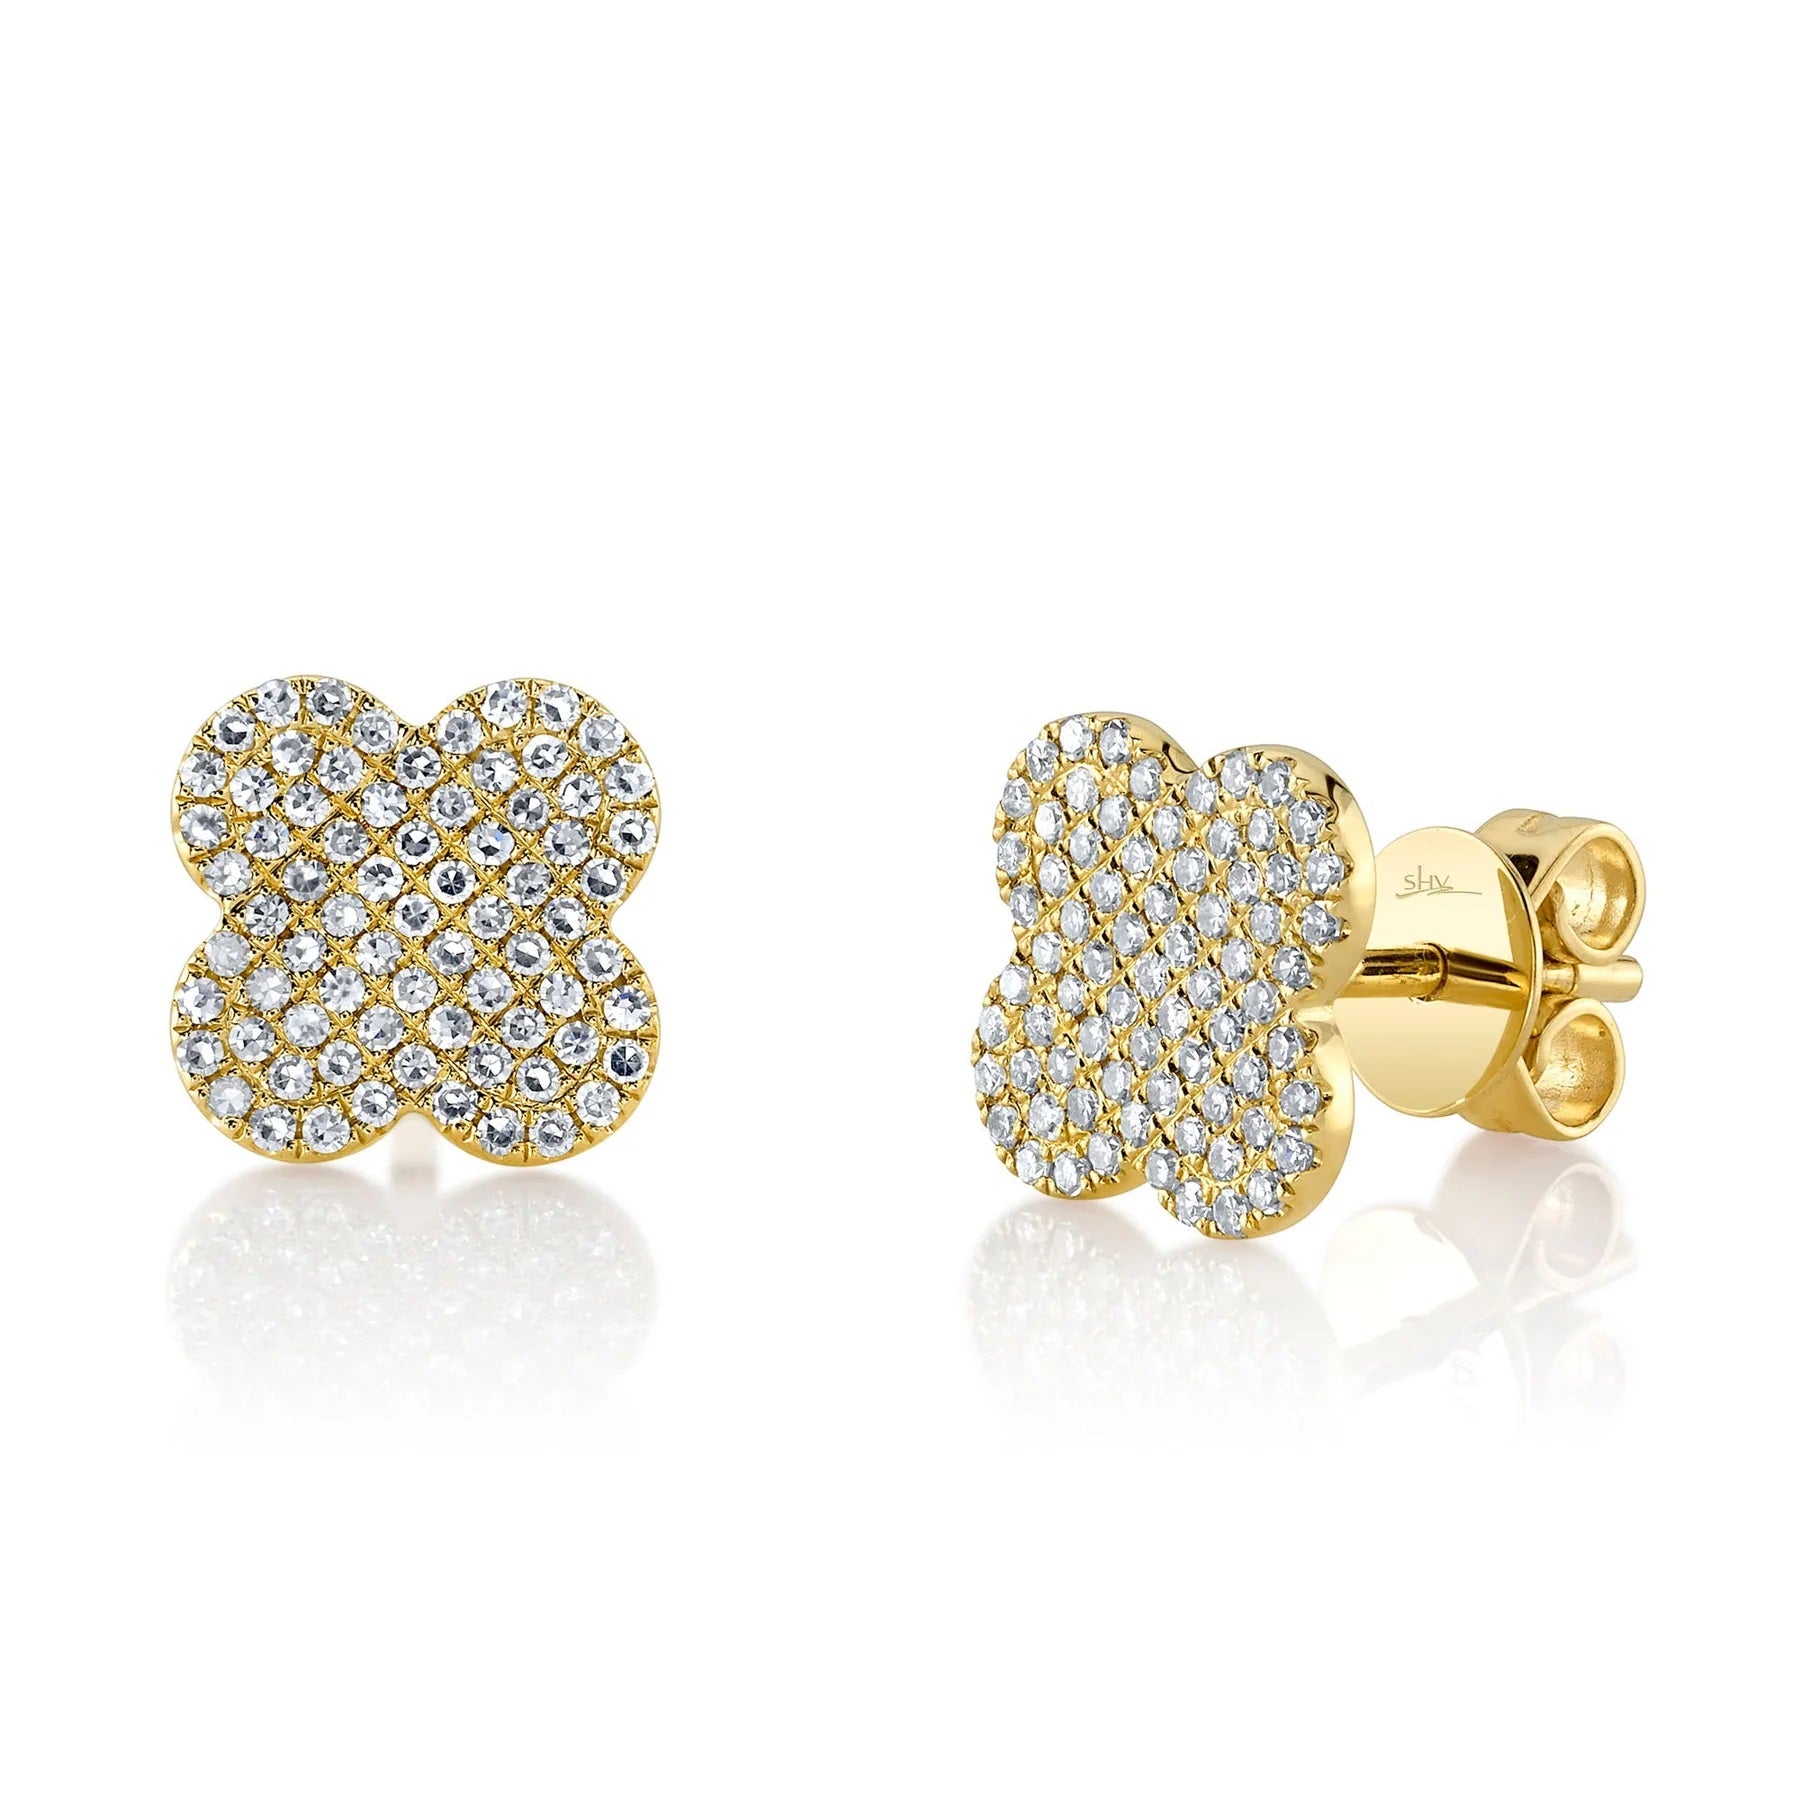 14K YELLOW GOLD AND DIAMOND CLOVER EARRINGS .32CT